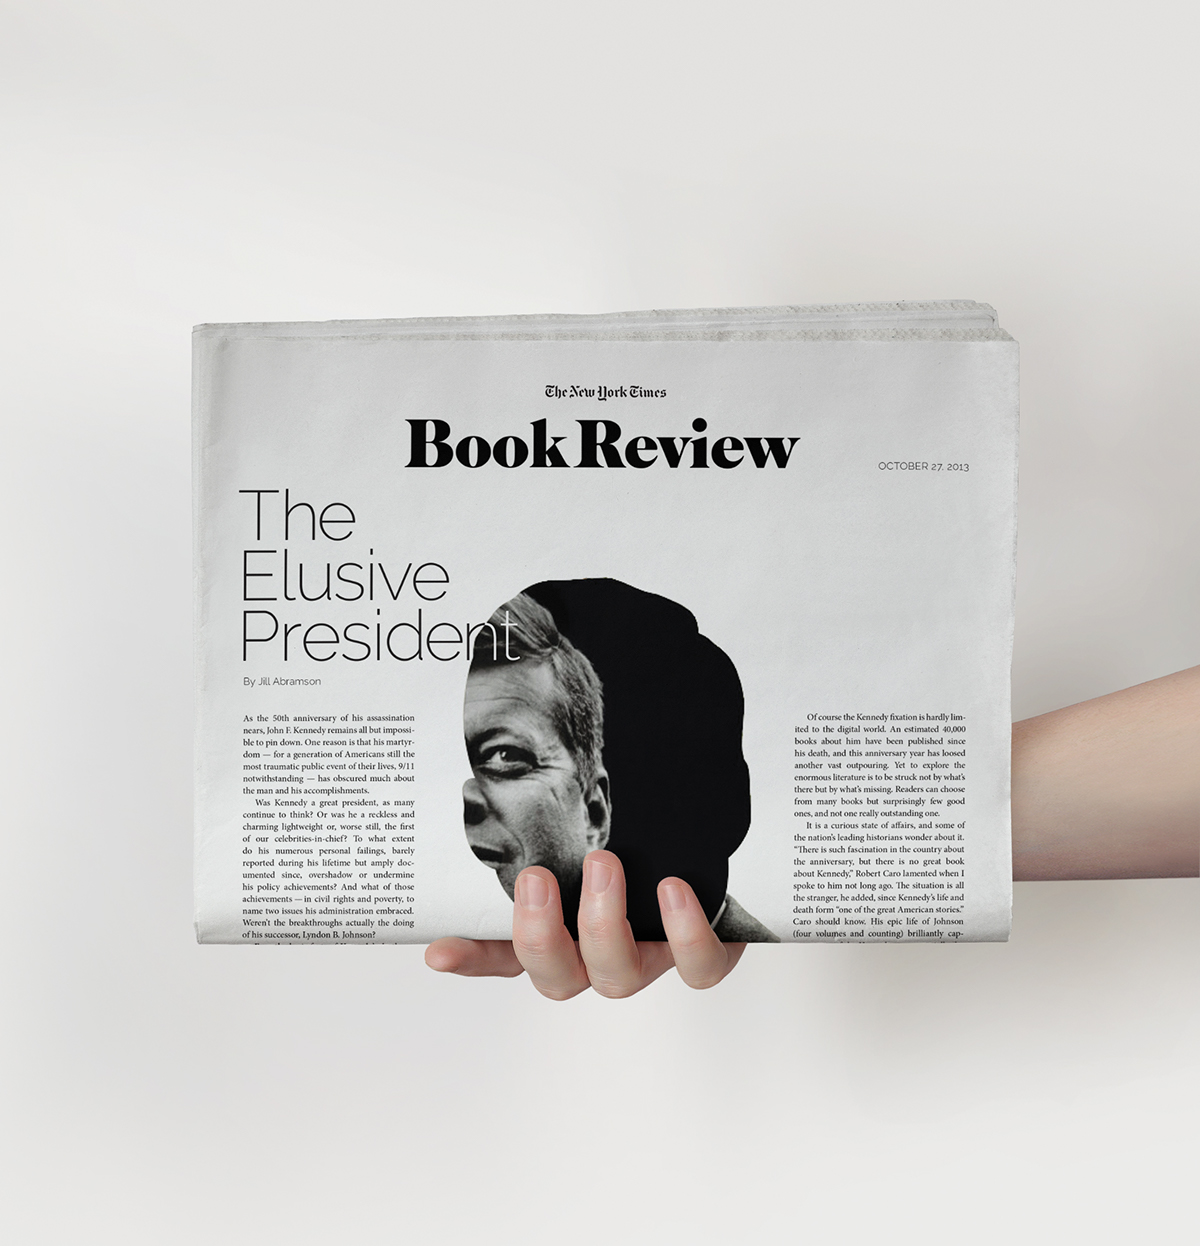 redesign editorial newspaper newyorktimes   design graphic magazines magazine contemporary book type Layout composition hierarchy rebranding